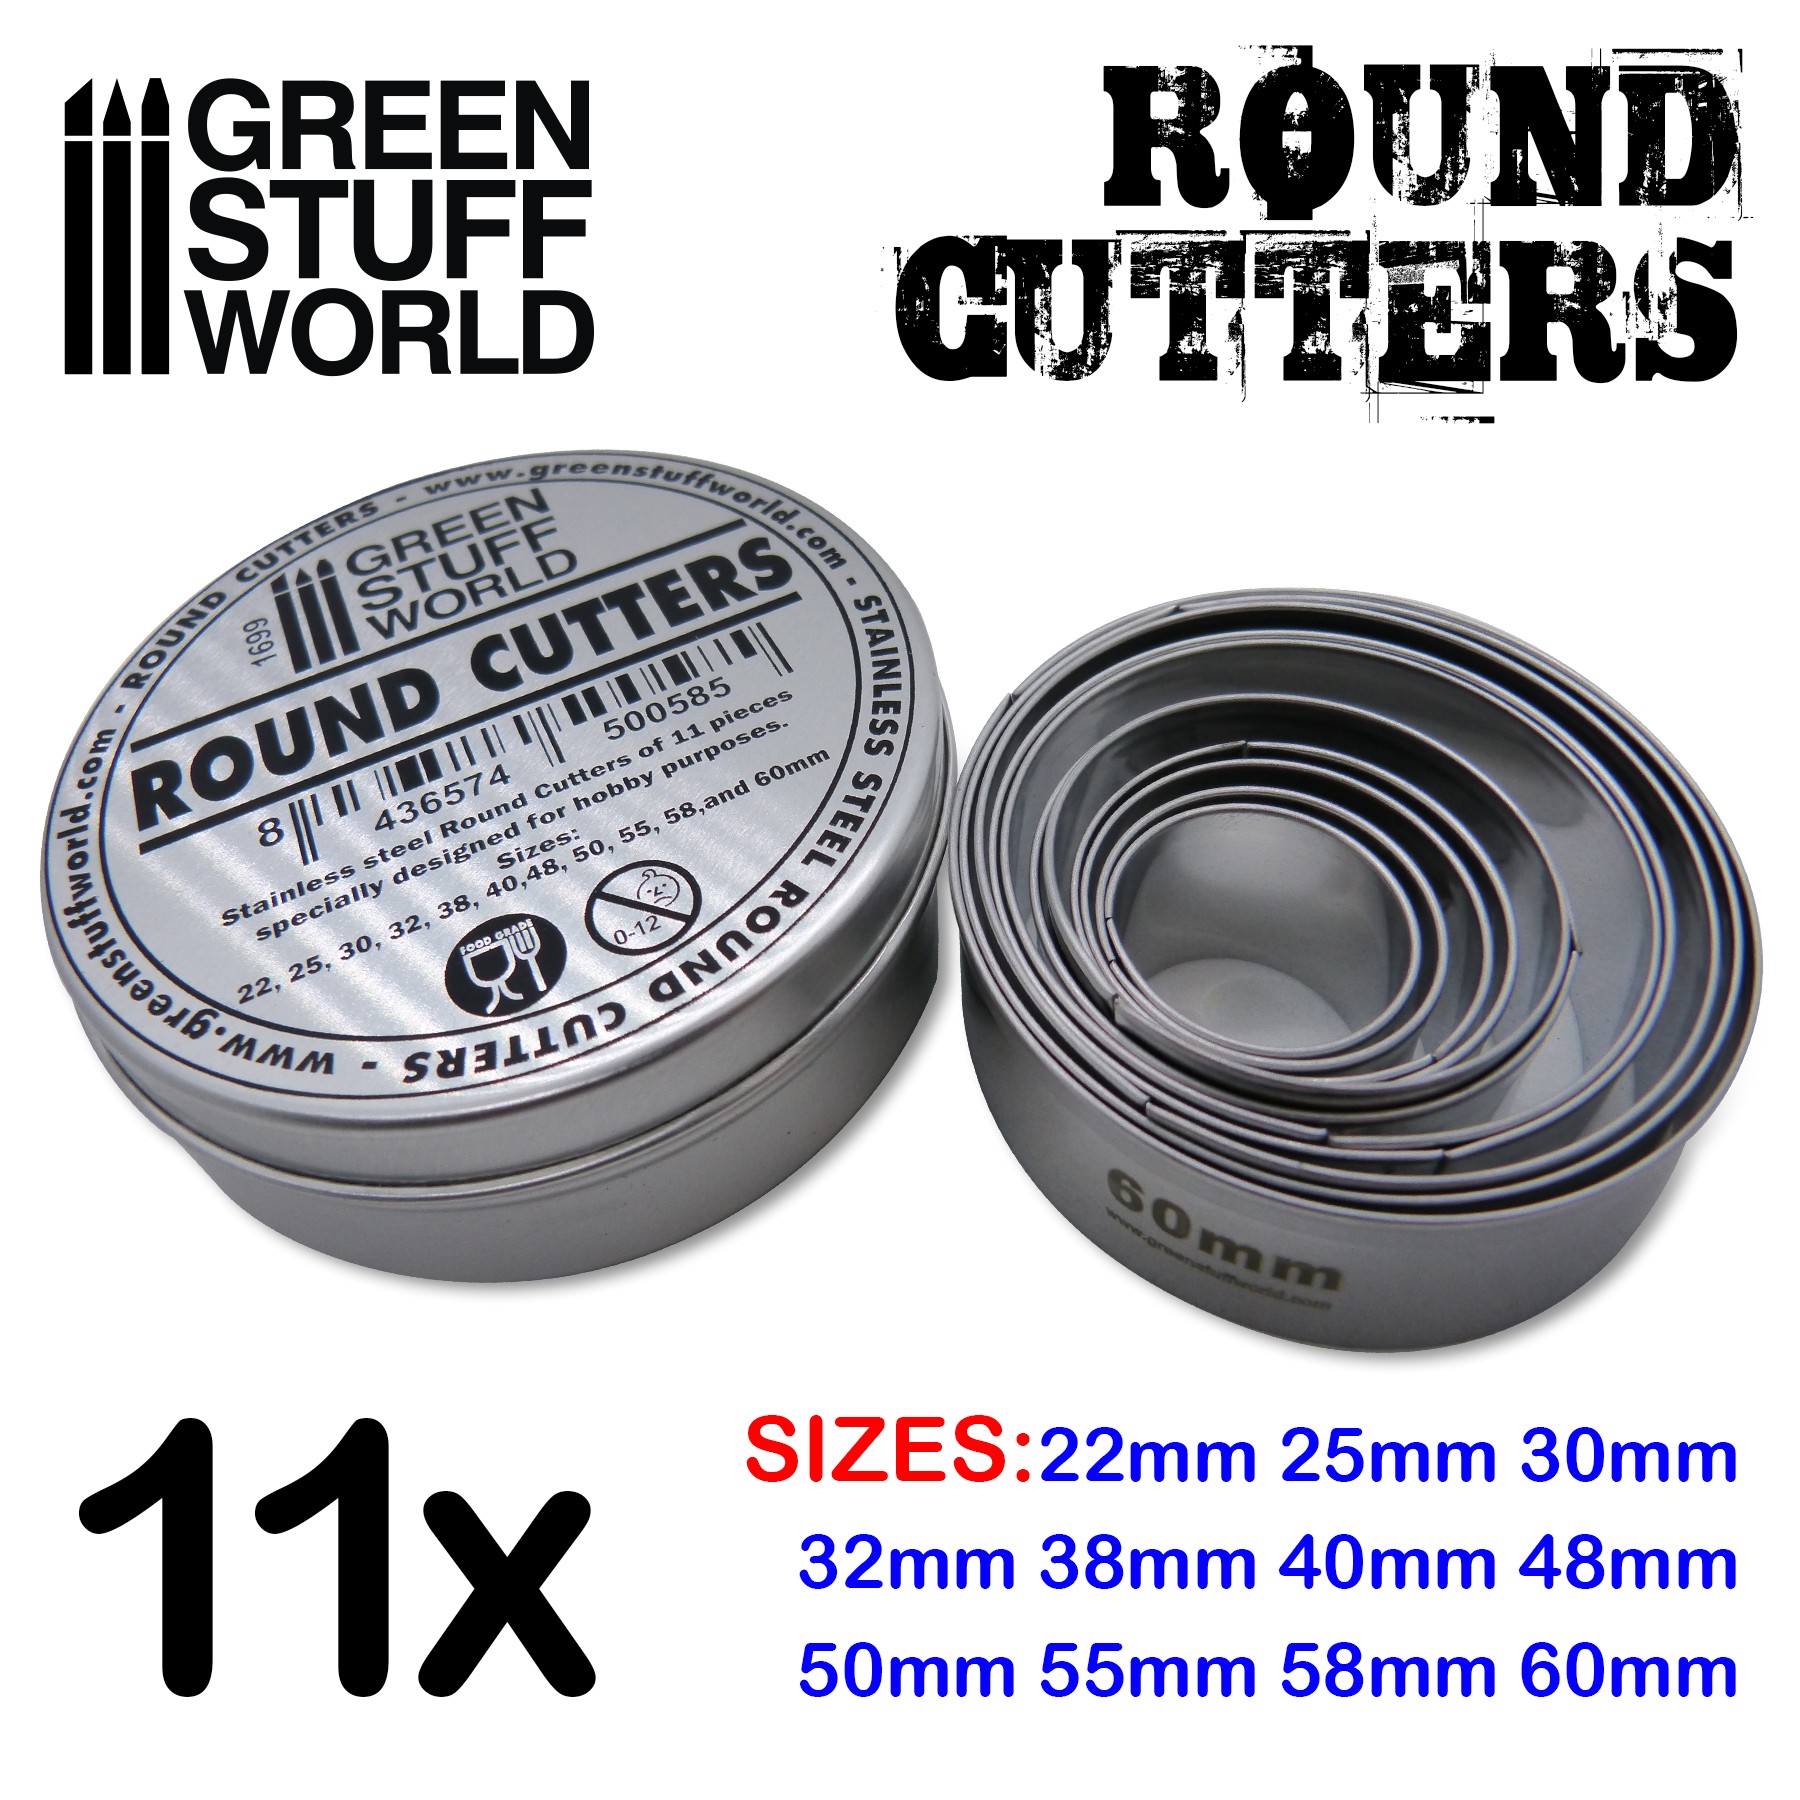 ROUND CIRCLE 28mm DARK BROWN ACRYLIC BASES for Roleplay Miniatures 